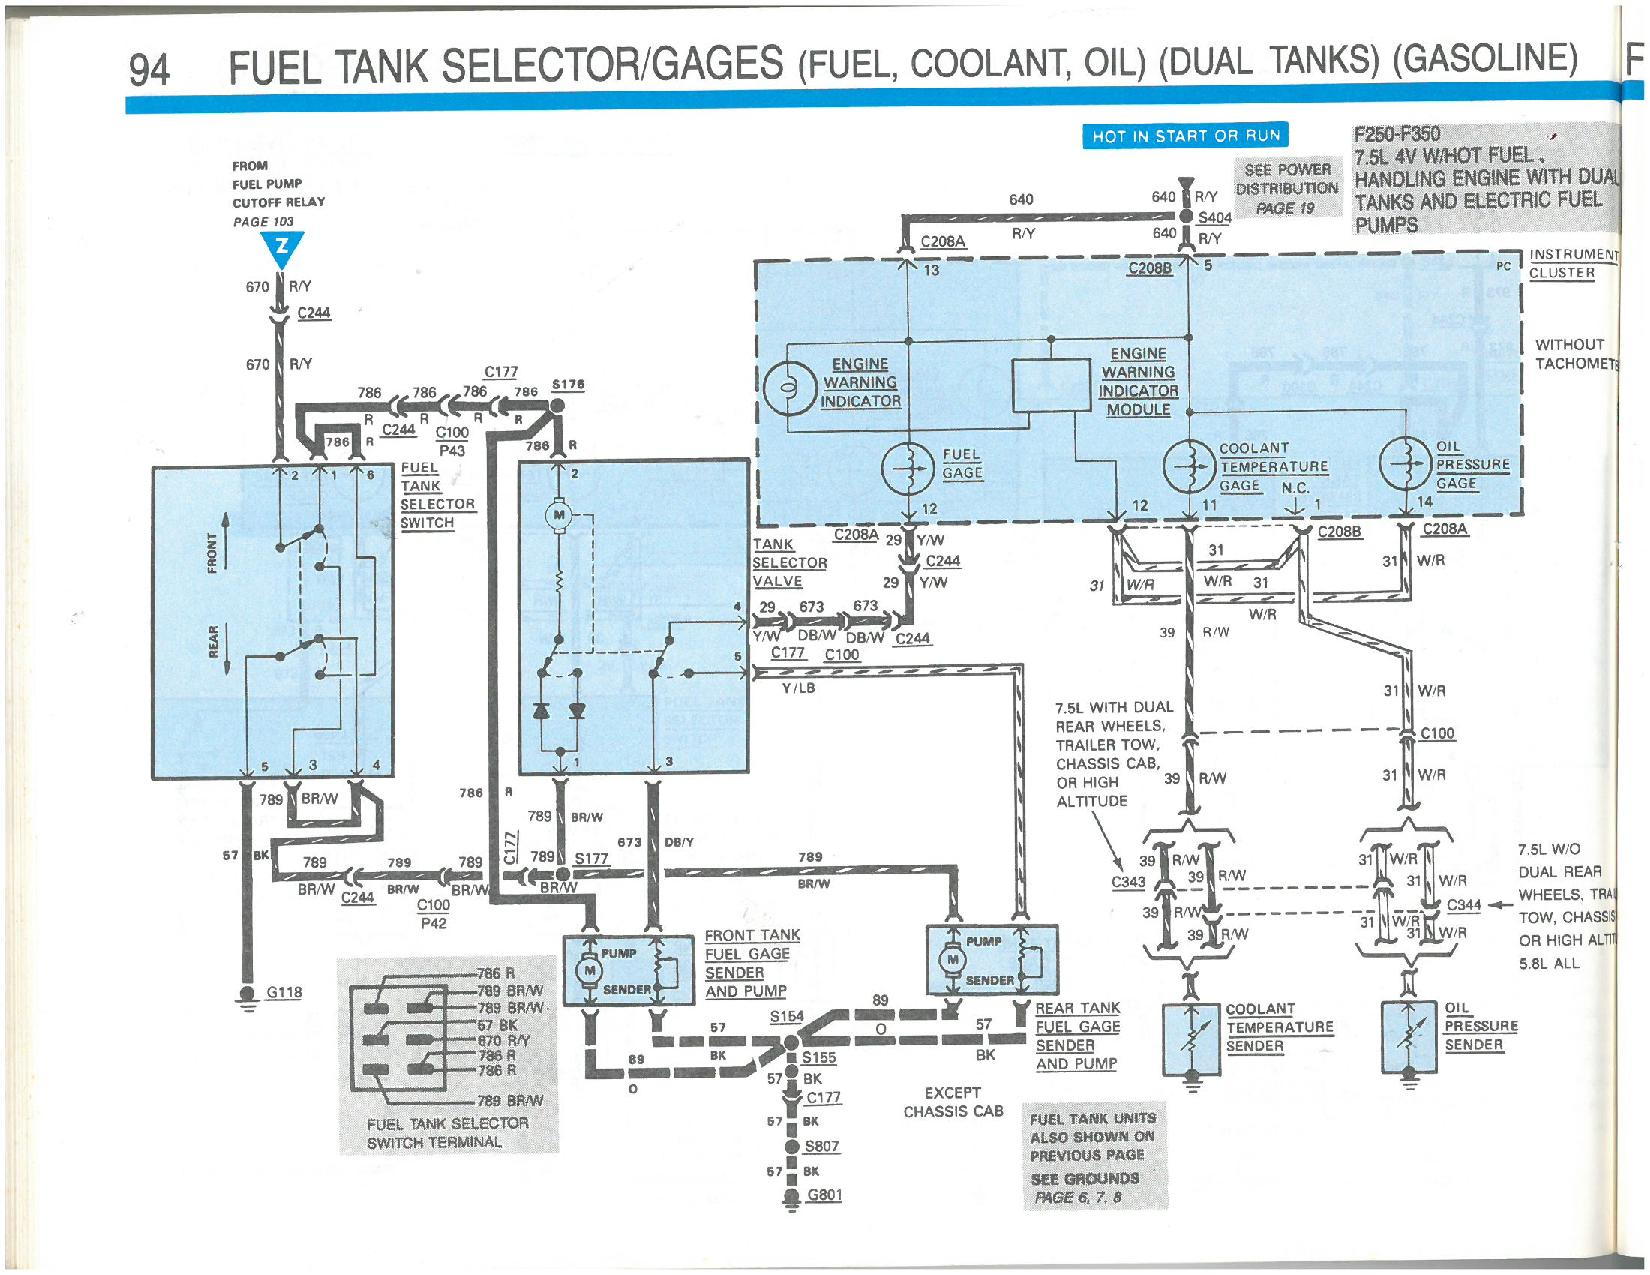 1987 F250 7.5L dual tank switch issue - Ford Truck Enthusiasts Forums